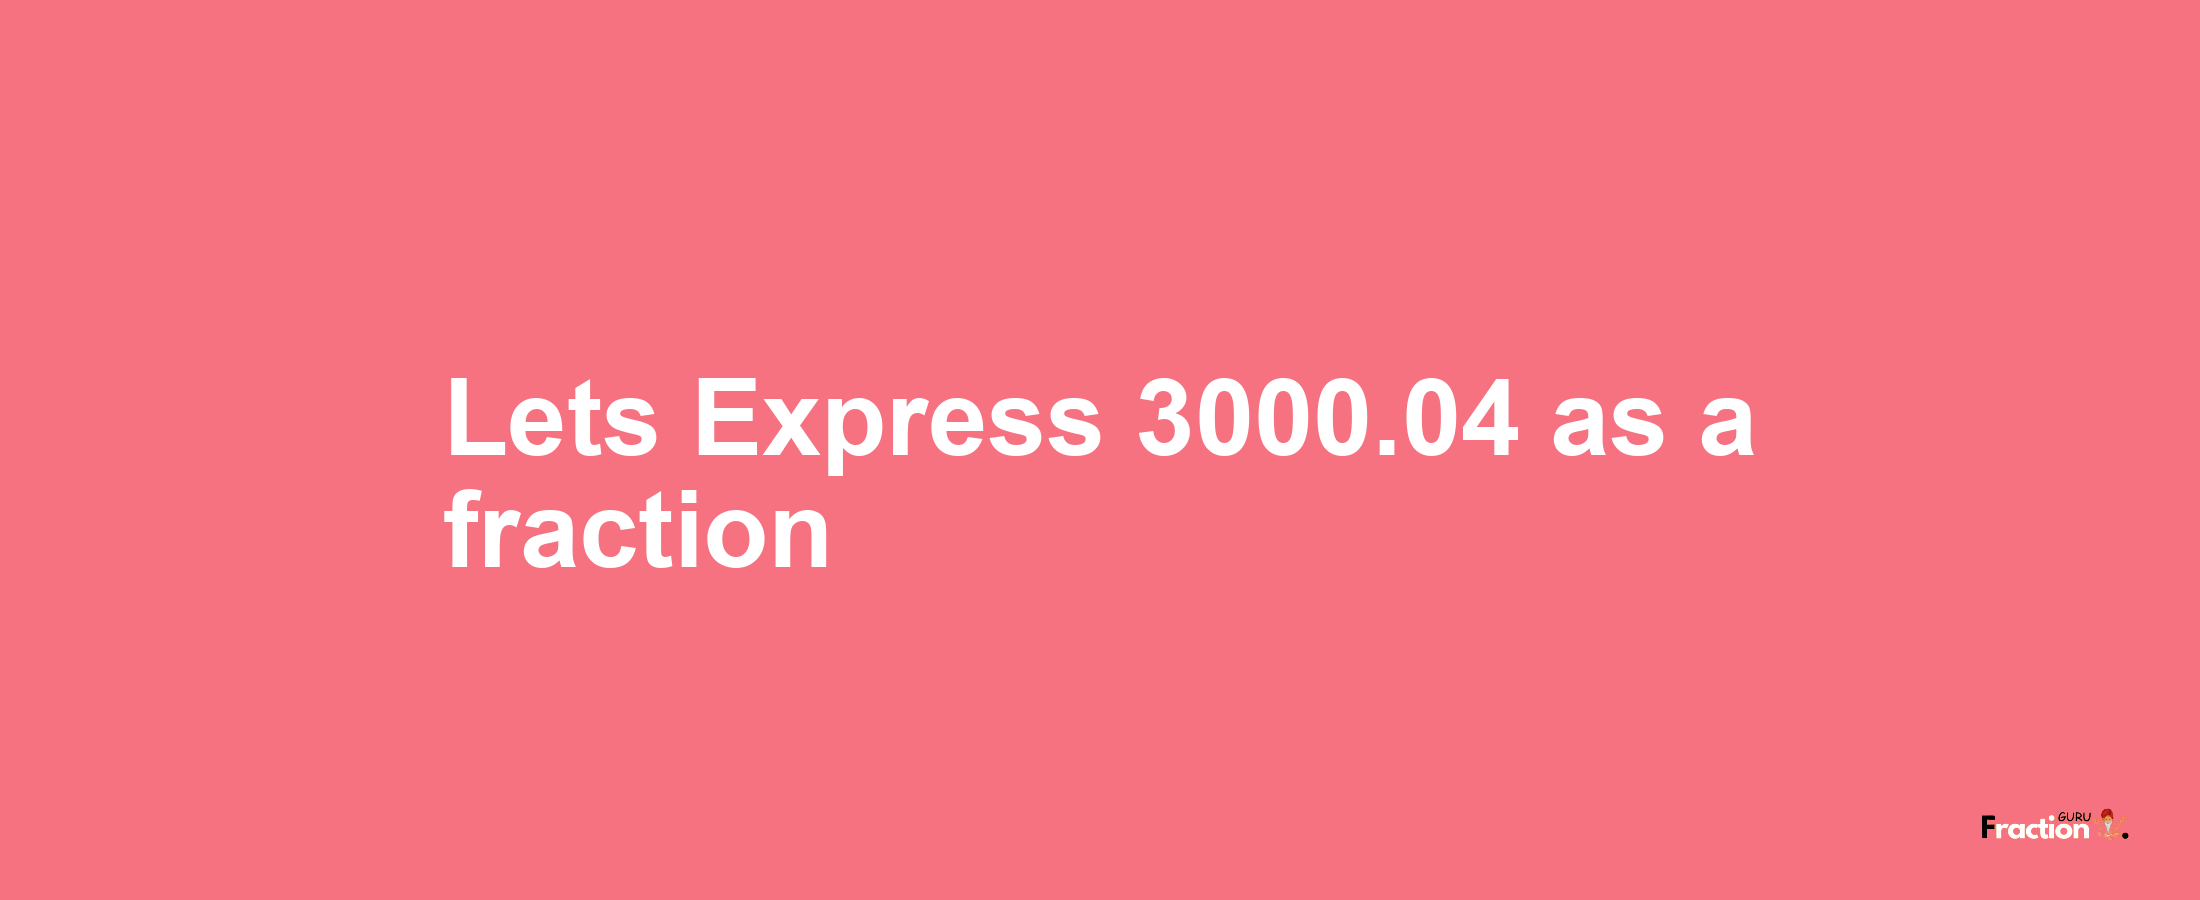 Lets Express 3000.04 as afraction